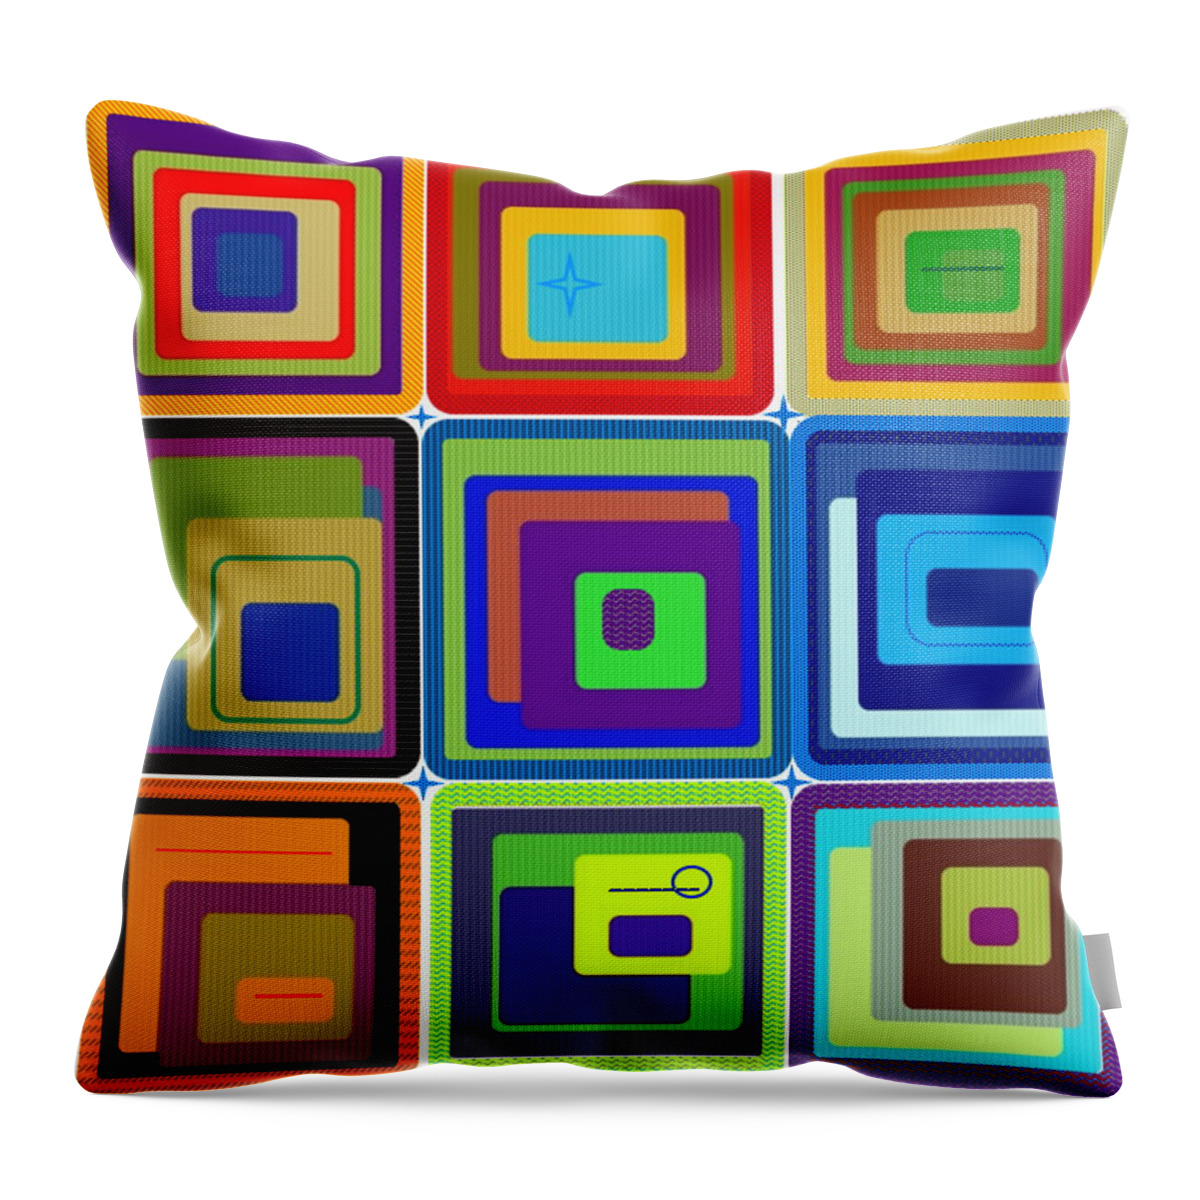 Corners Throw Pillow featuring the digital art Creative Corner by Designs By L